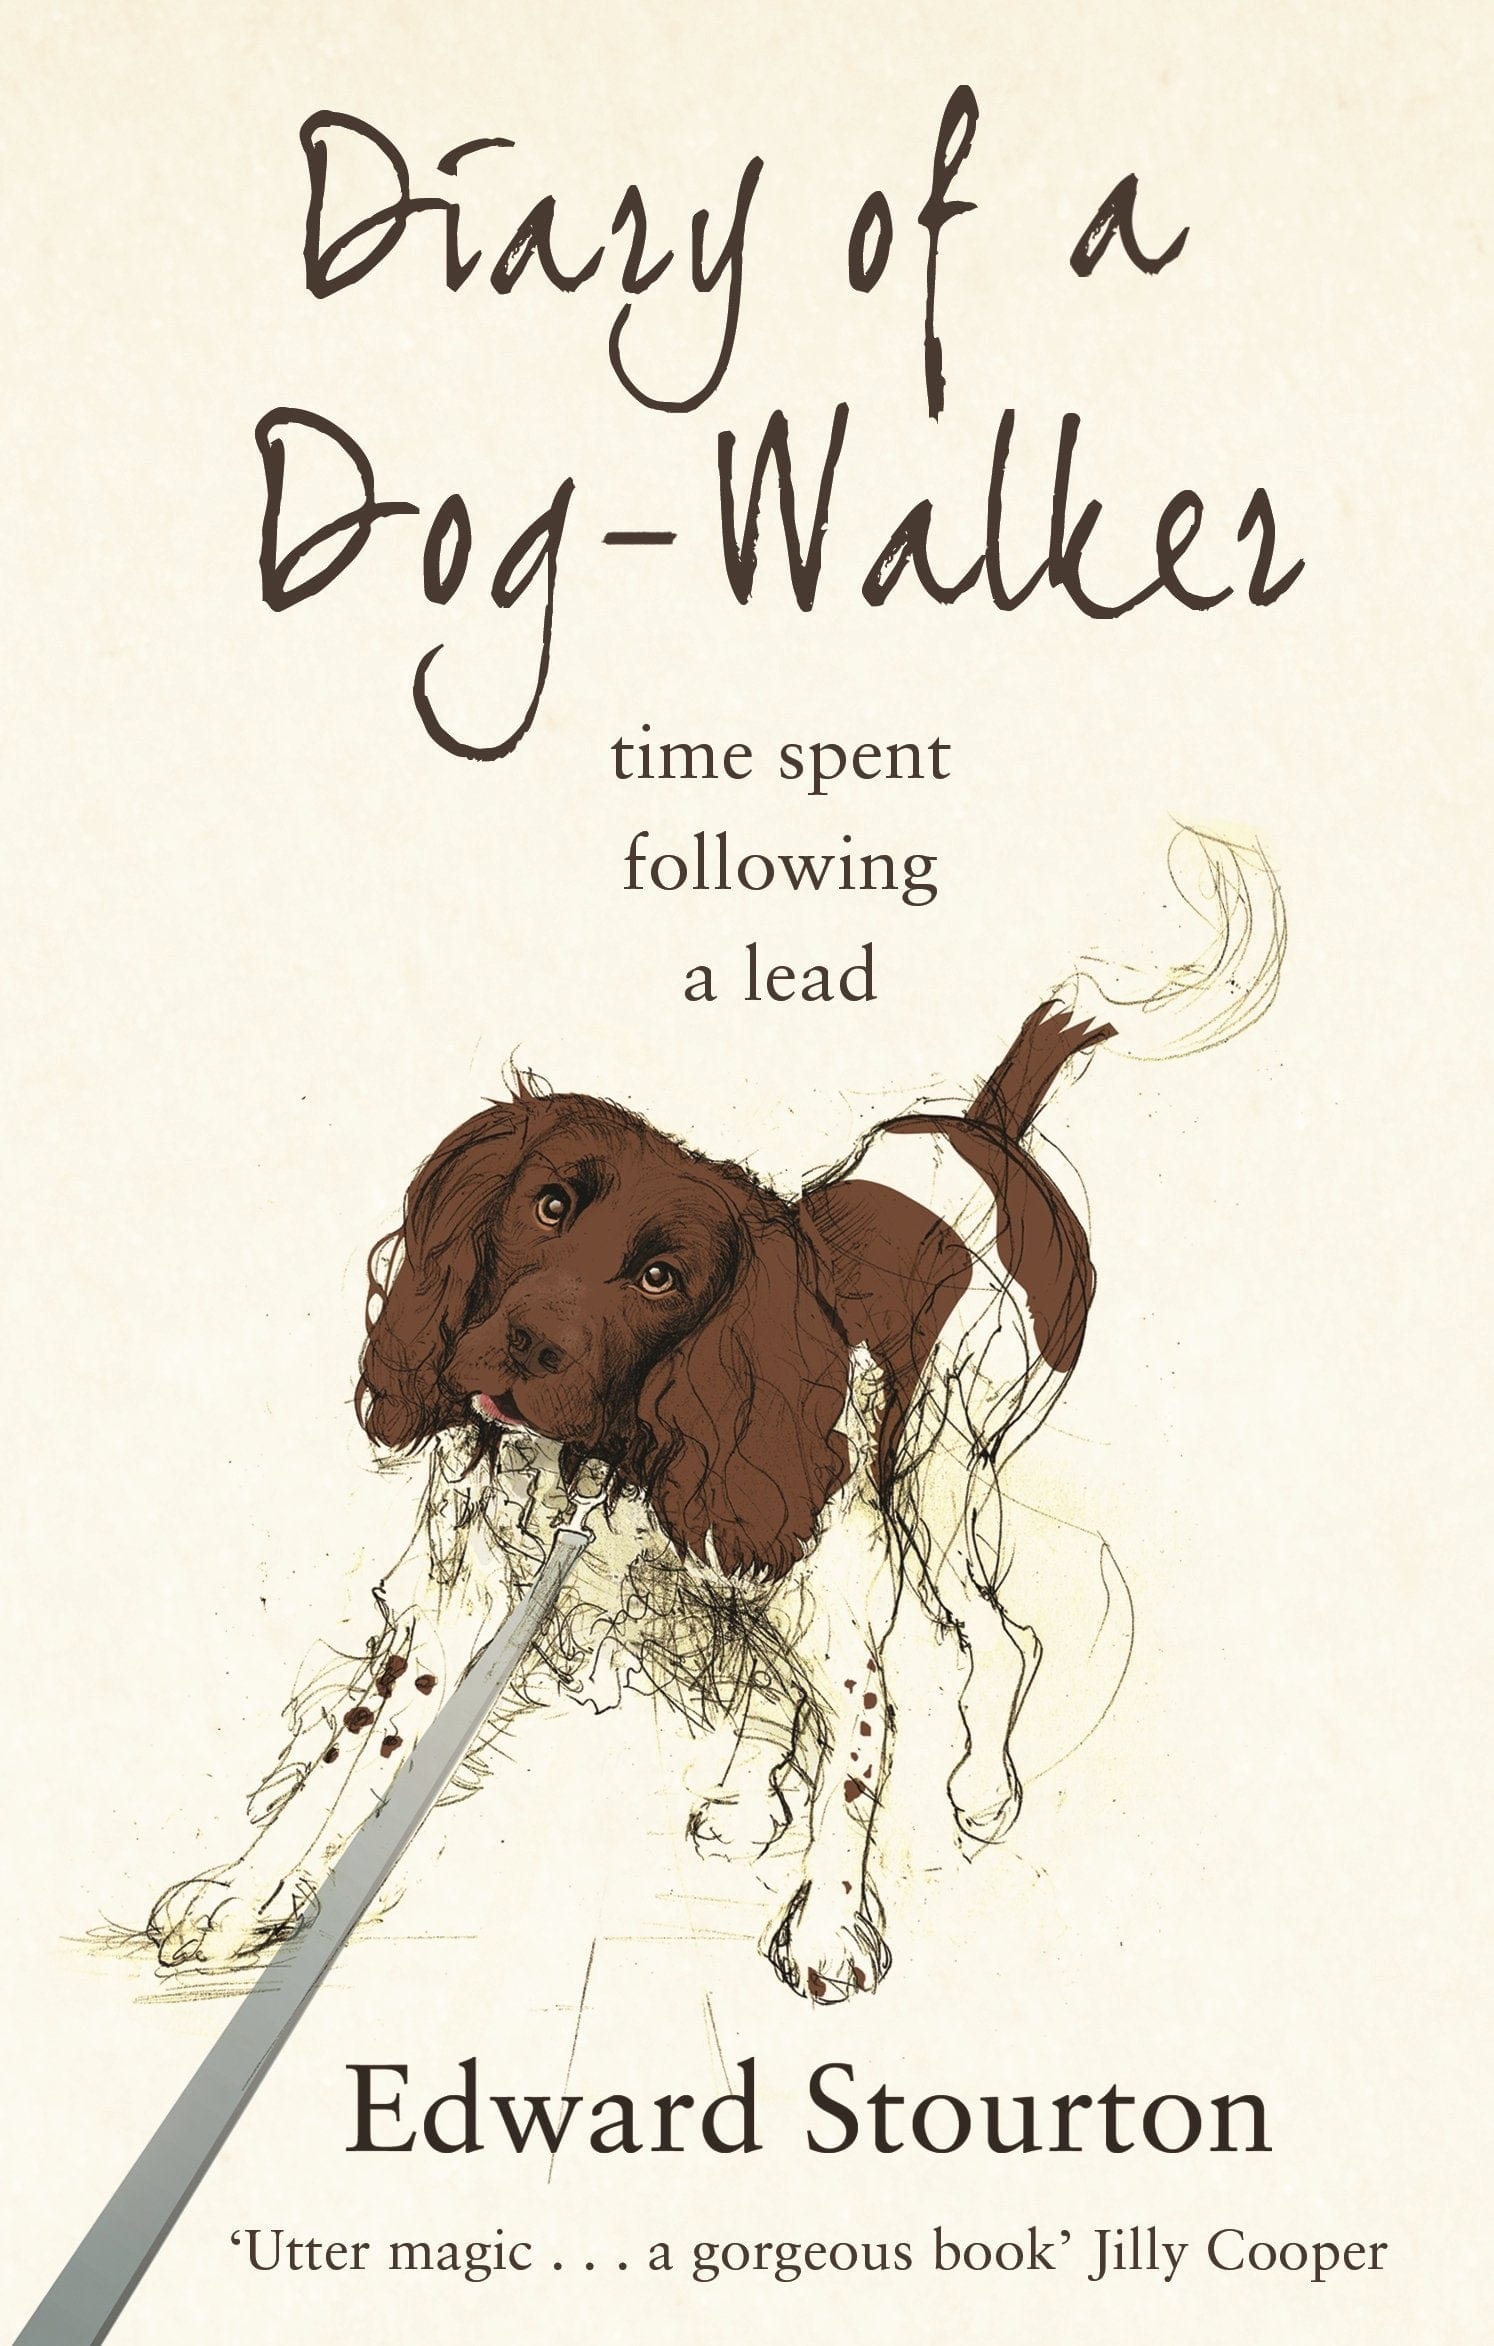 Diary of a Dog-walker: Time spent following a lead